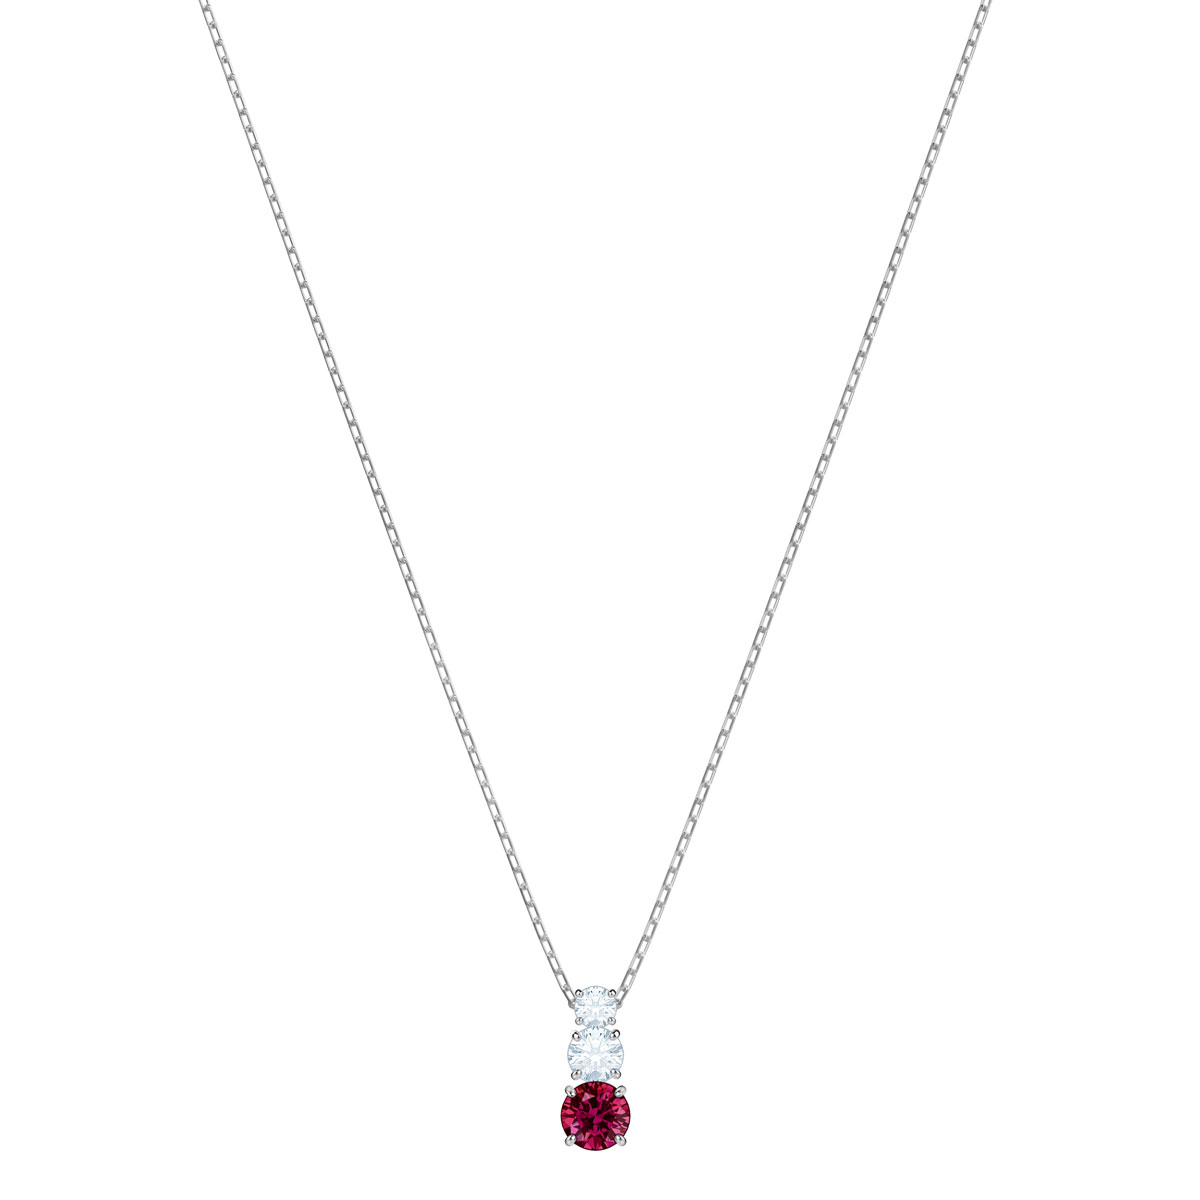 Swarovski Rhodium Crystal and Red Attract Trilogy Round Pendant Necklace